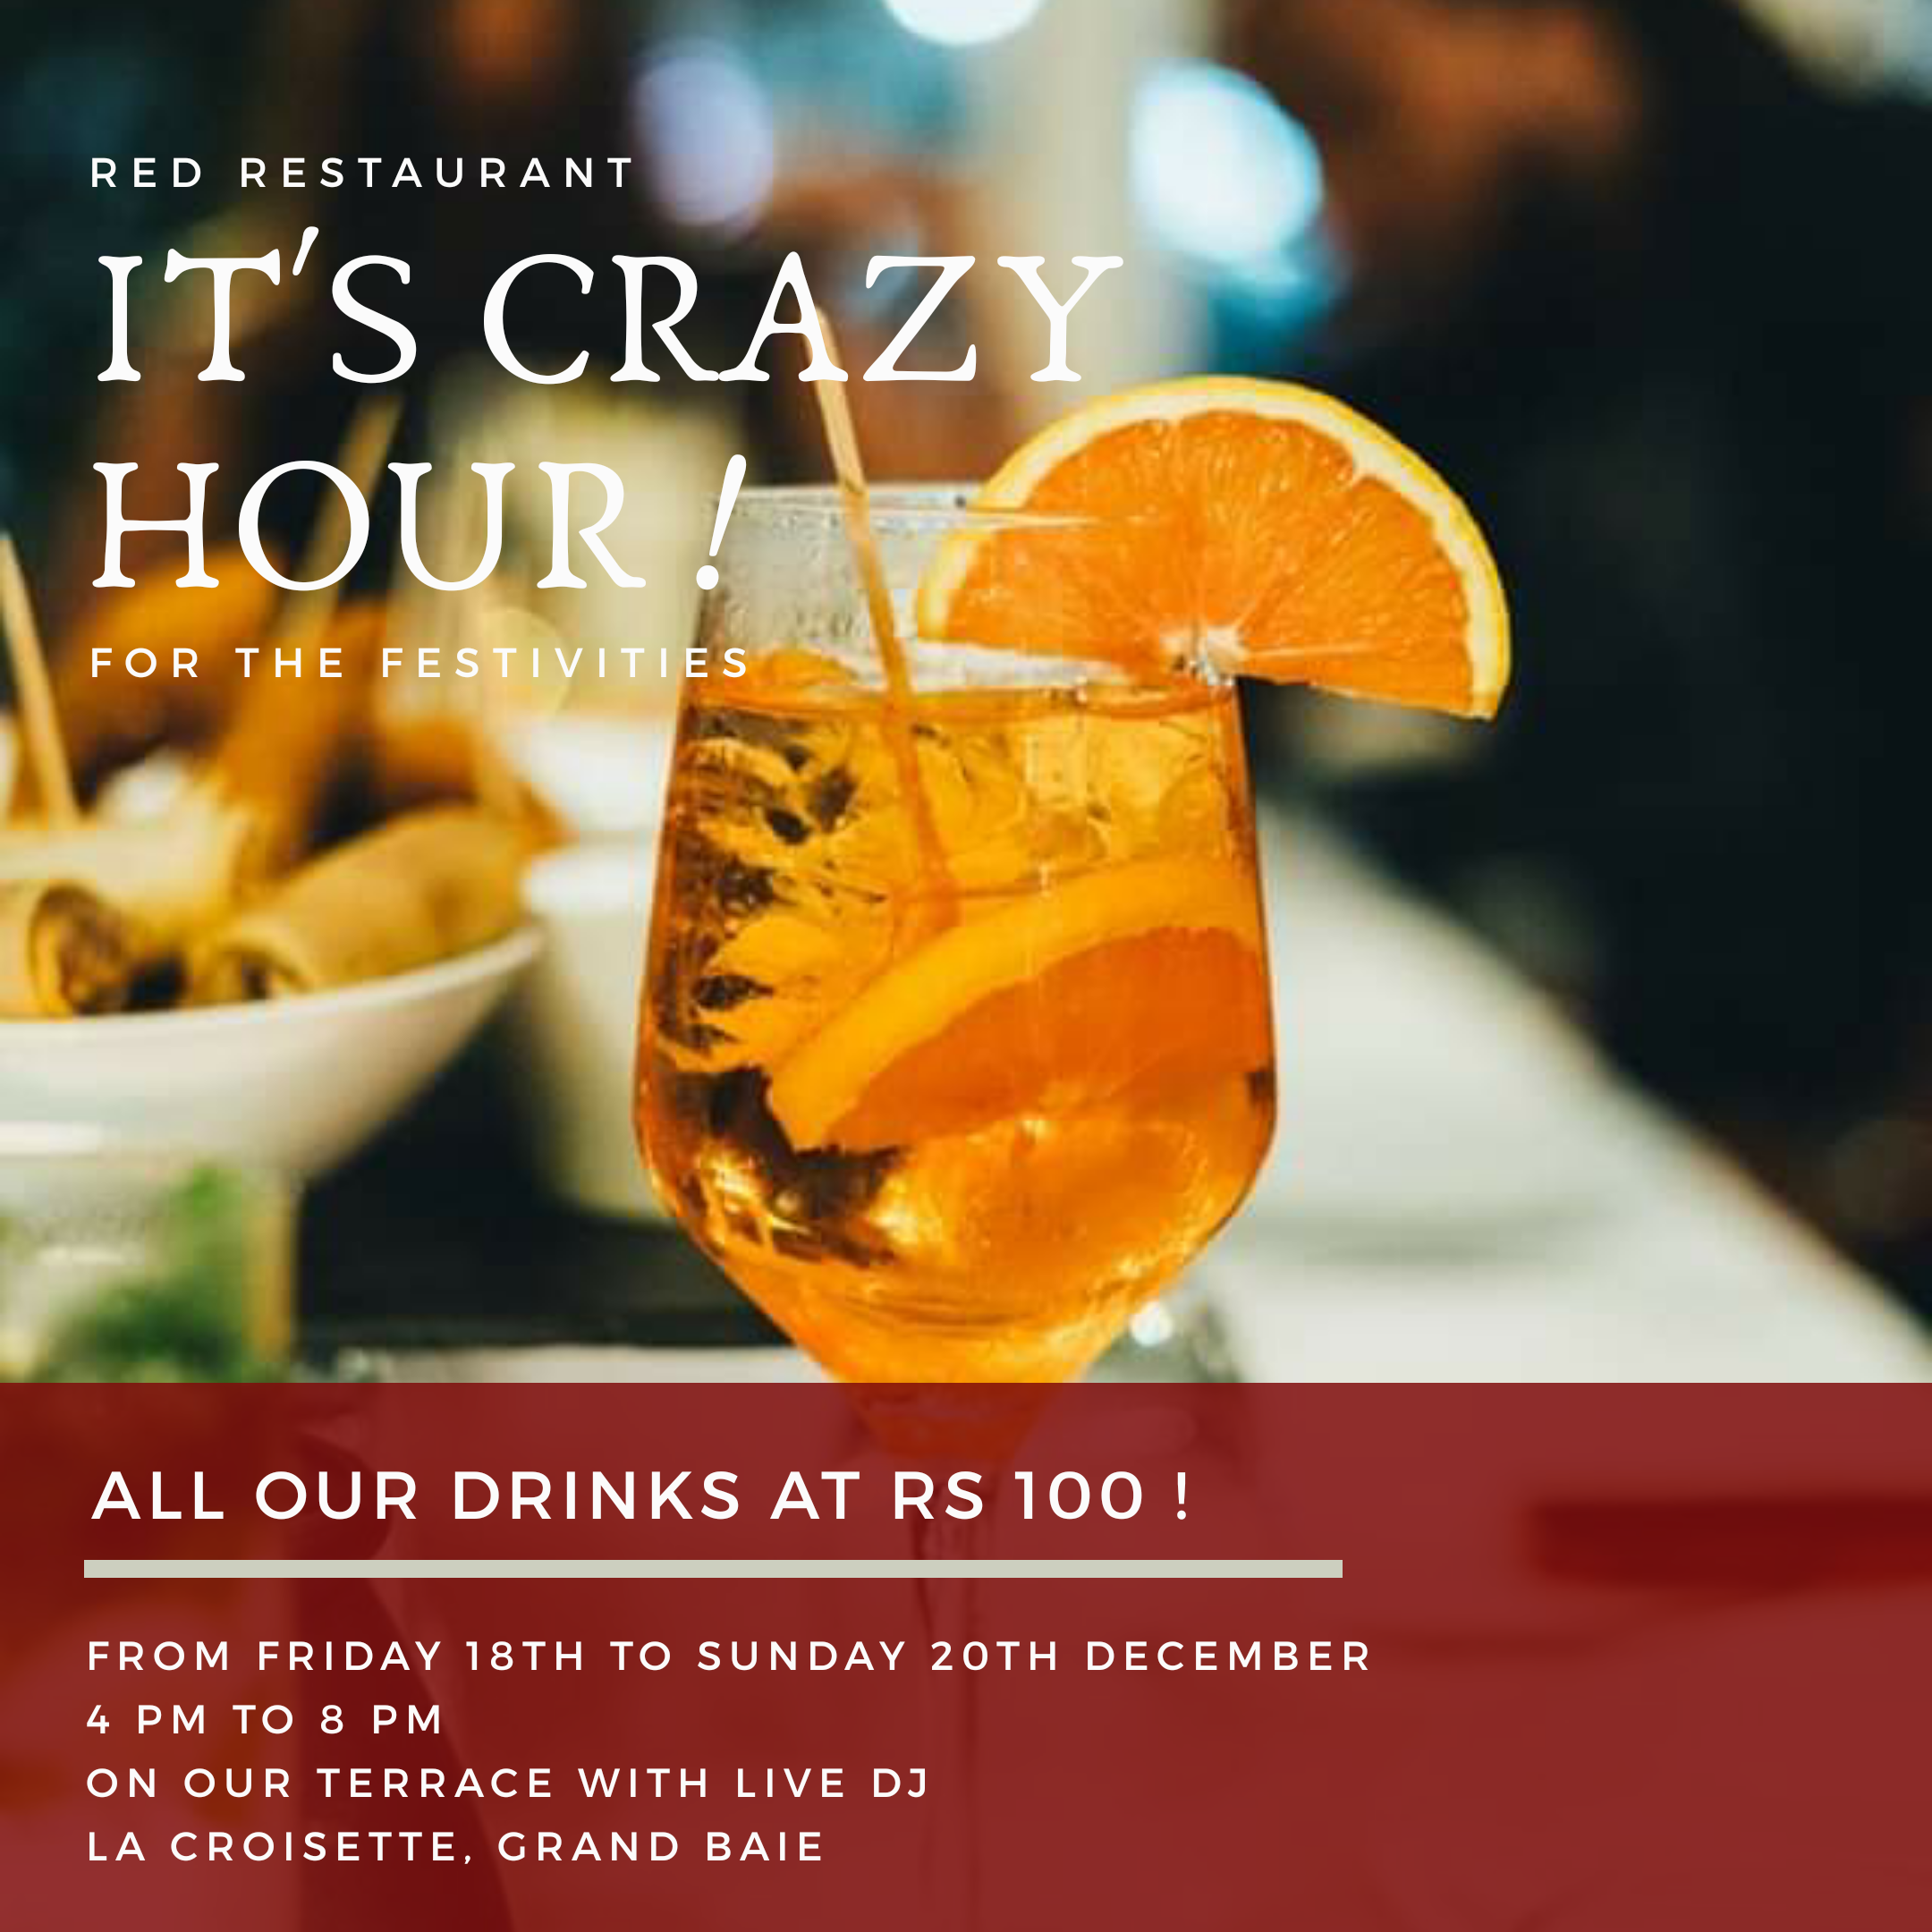 Happy Hour at Red